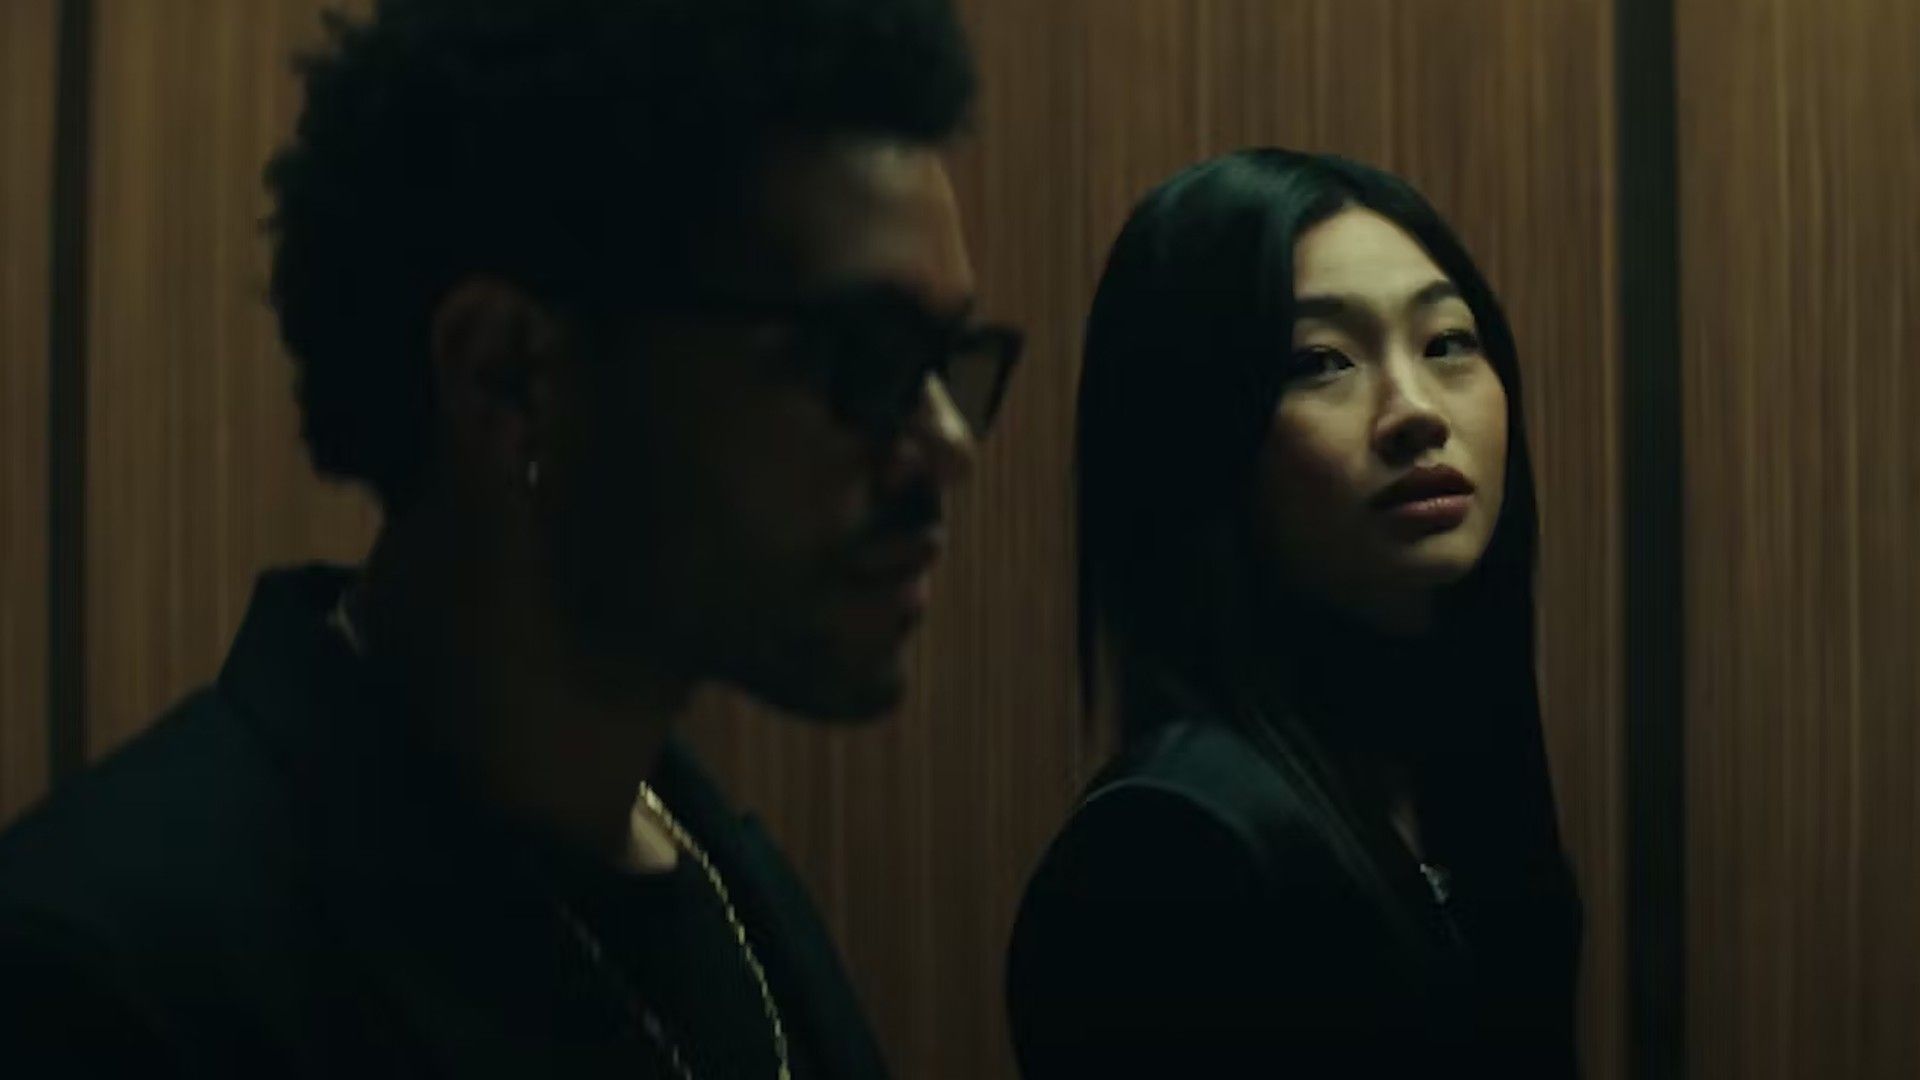 Jung Ho-Yeon in The Weeknd's music video